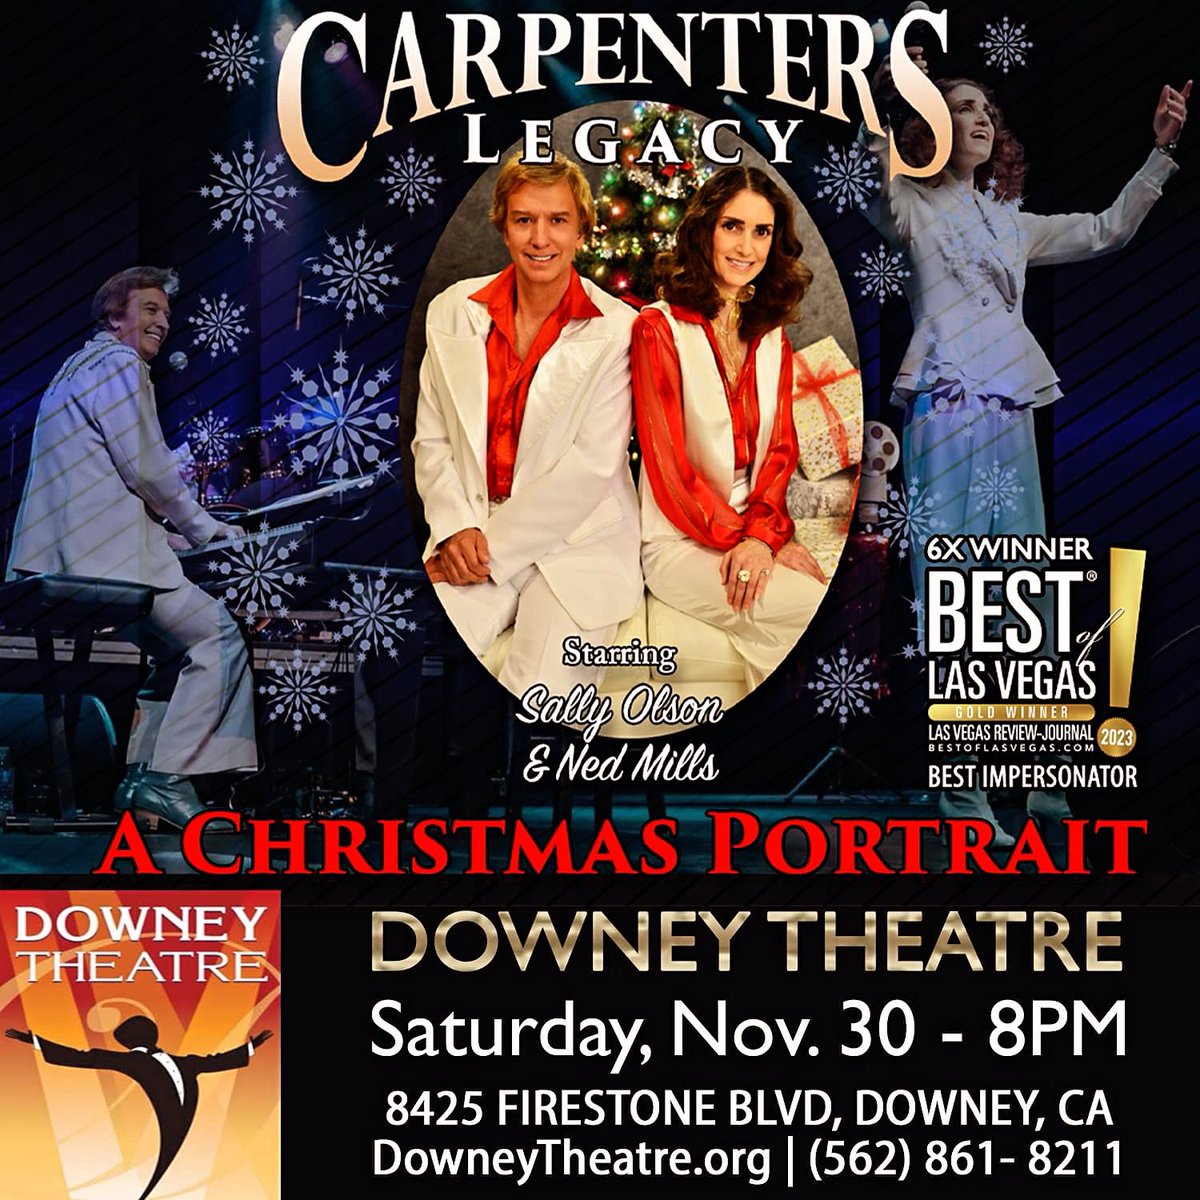 We are thrilled to announce that we will be returning to the Downey Theatre for the 4th time! Join us this holiday season for Carpenters Legacy: A Christmas Portrait on November 30. We absolutely love performing in Downey, the home of the Carpenters!